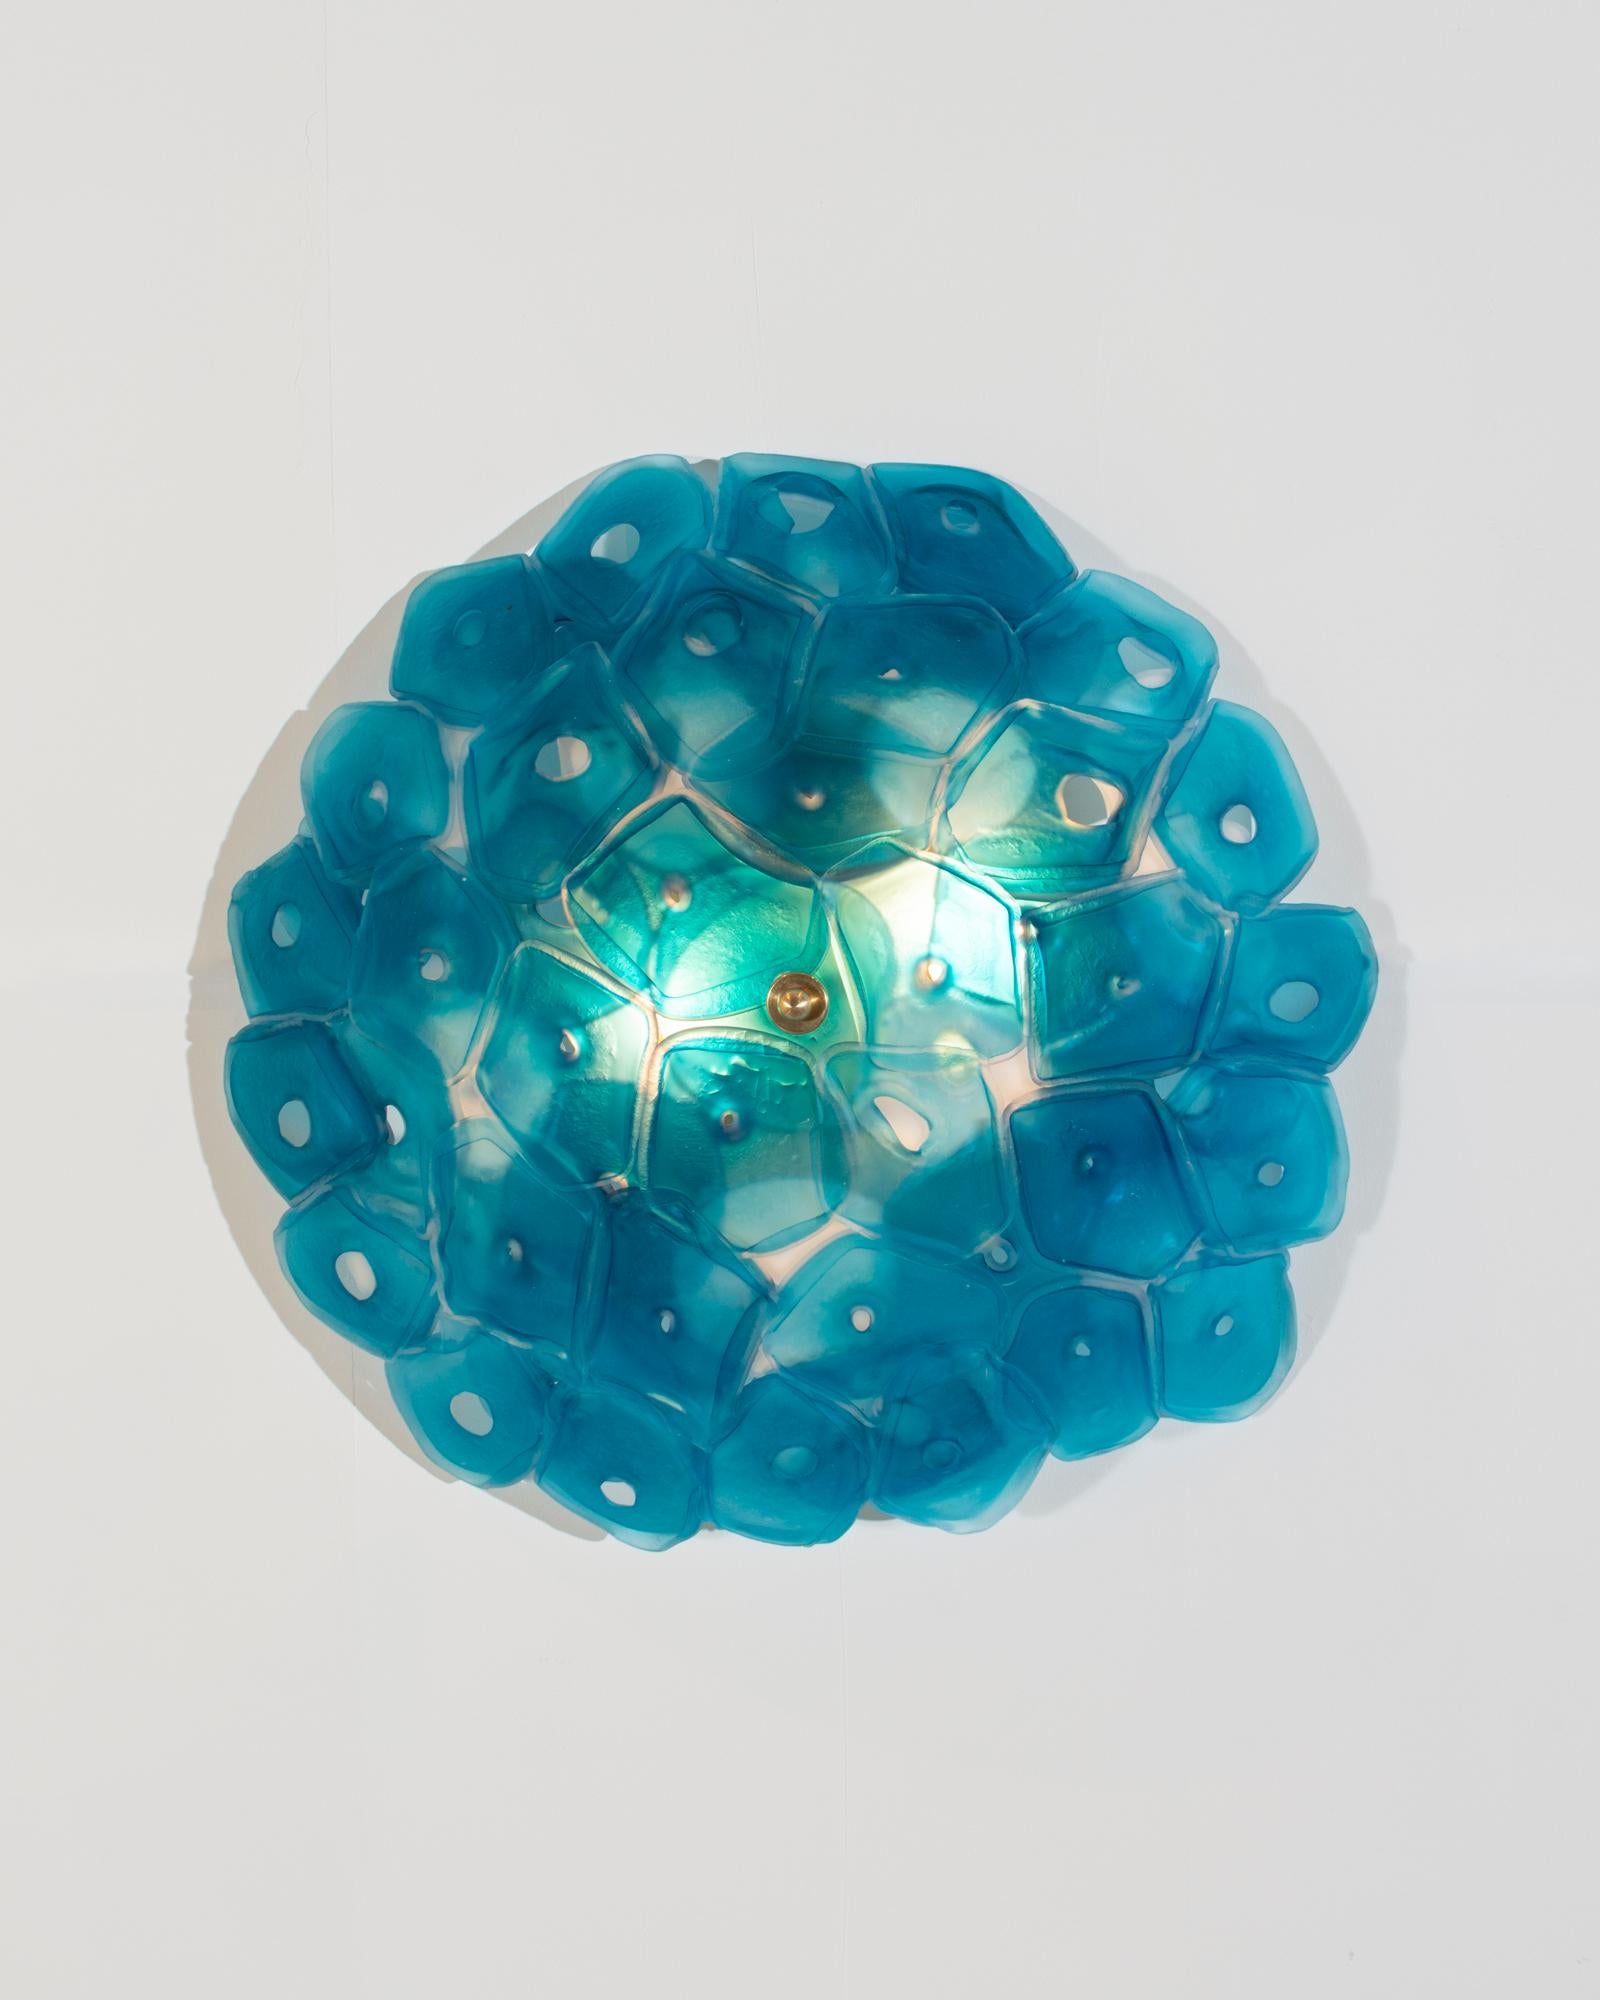 Unique wall-mounted sconce illuminated sculpture in slumped and fused blue glass. Designed and made by Jeff Zimmerman, USA, 2018.
   